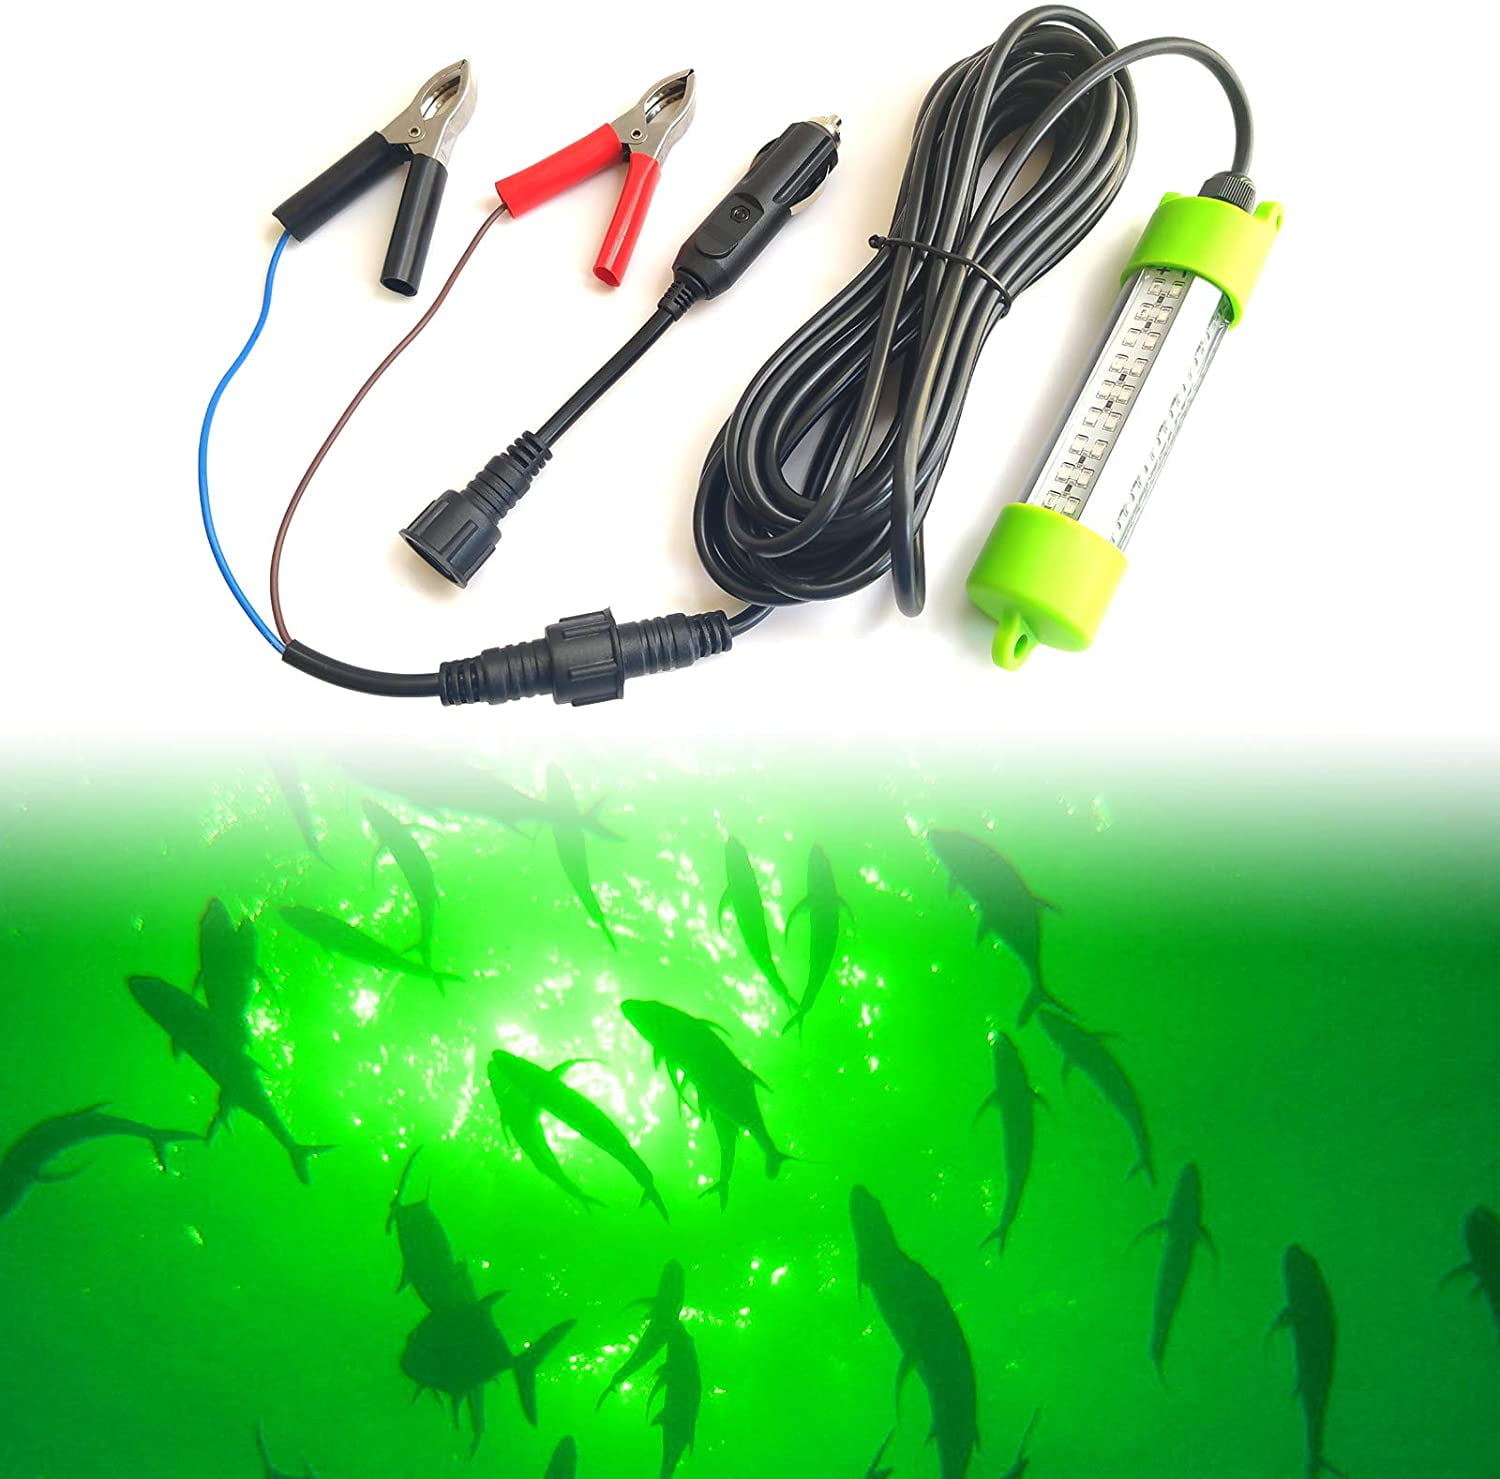 12V LED GREEN UNDERWATER SUBMERSIBLE NIGHT FISHING LIGHT crappie shad squid boat 